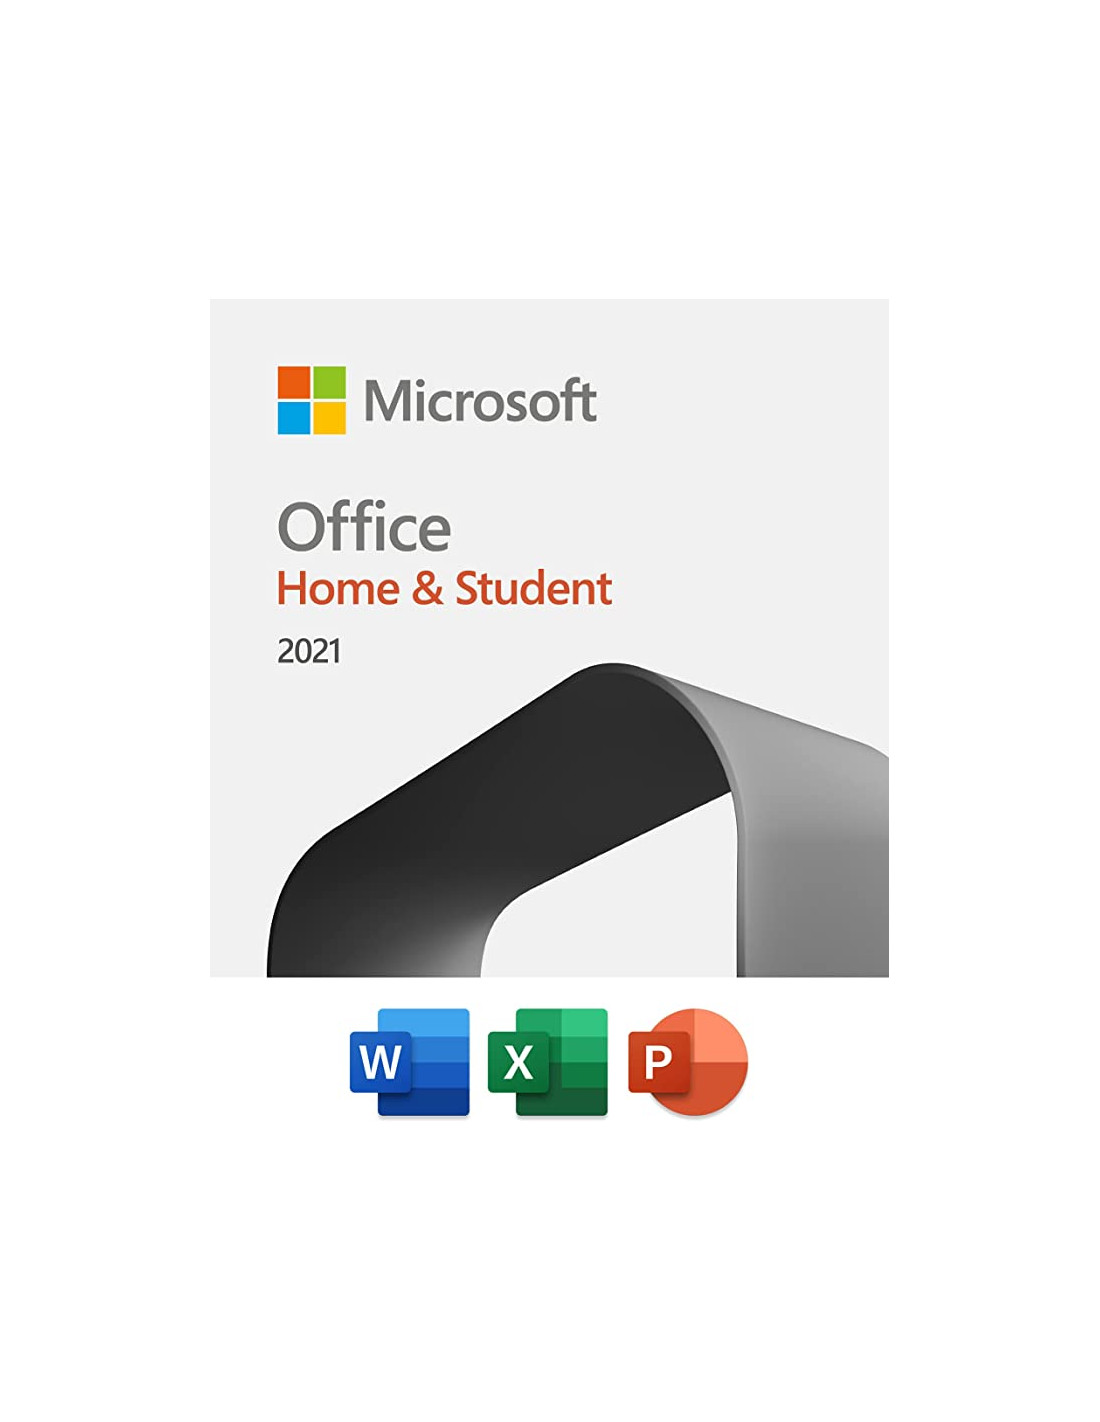 Microsoft Office 2021 Home and Student for Windows PC